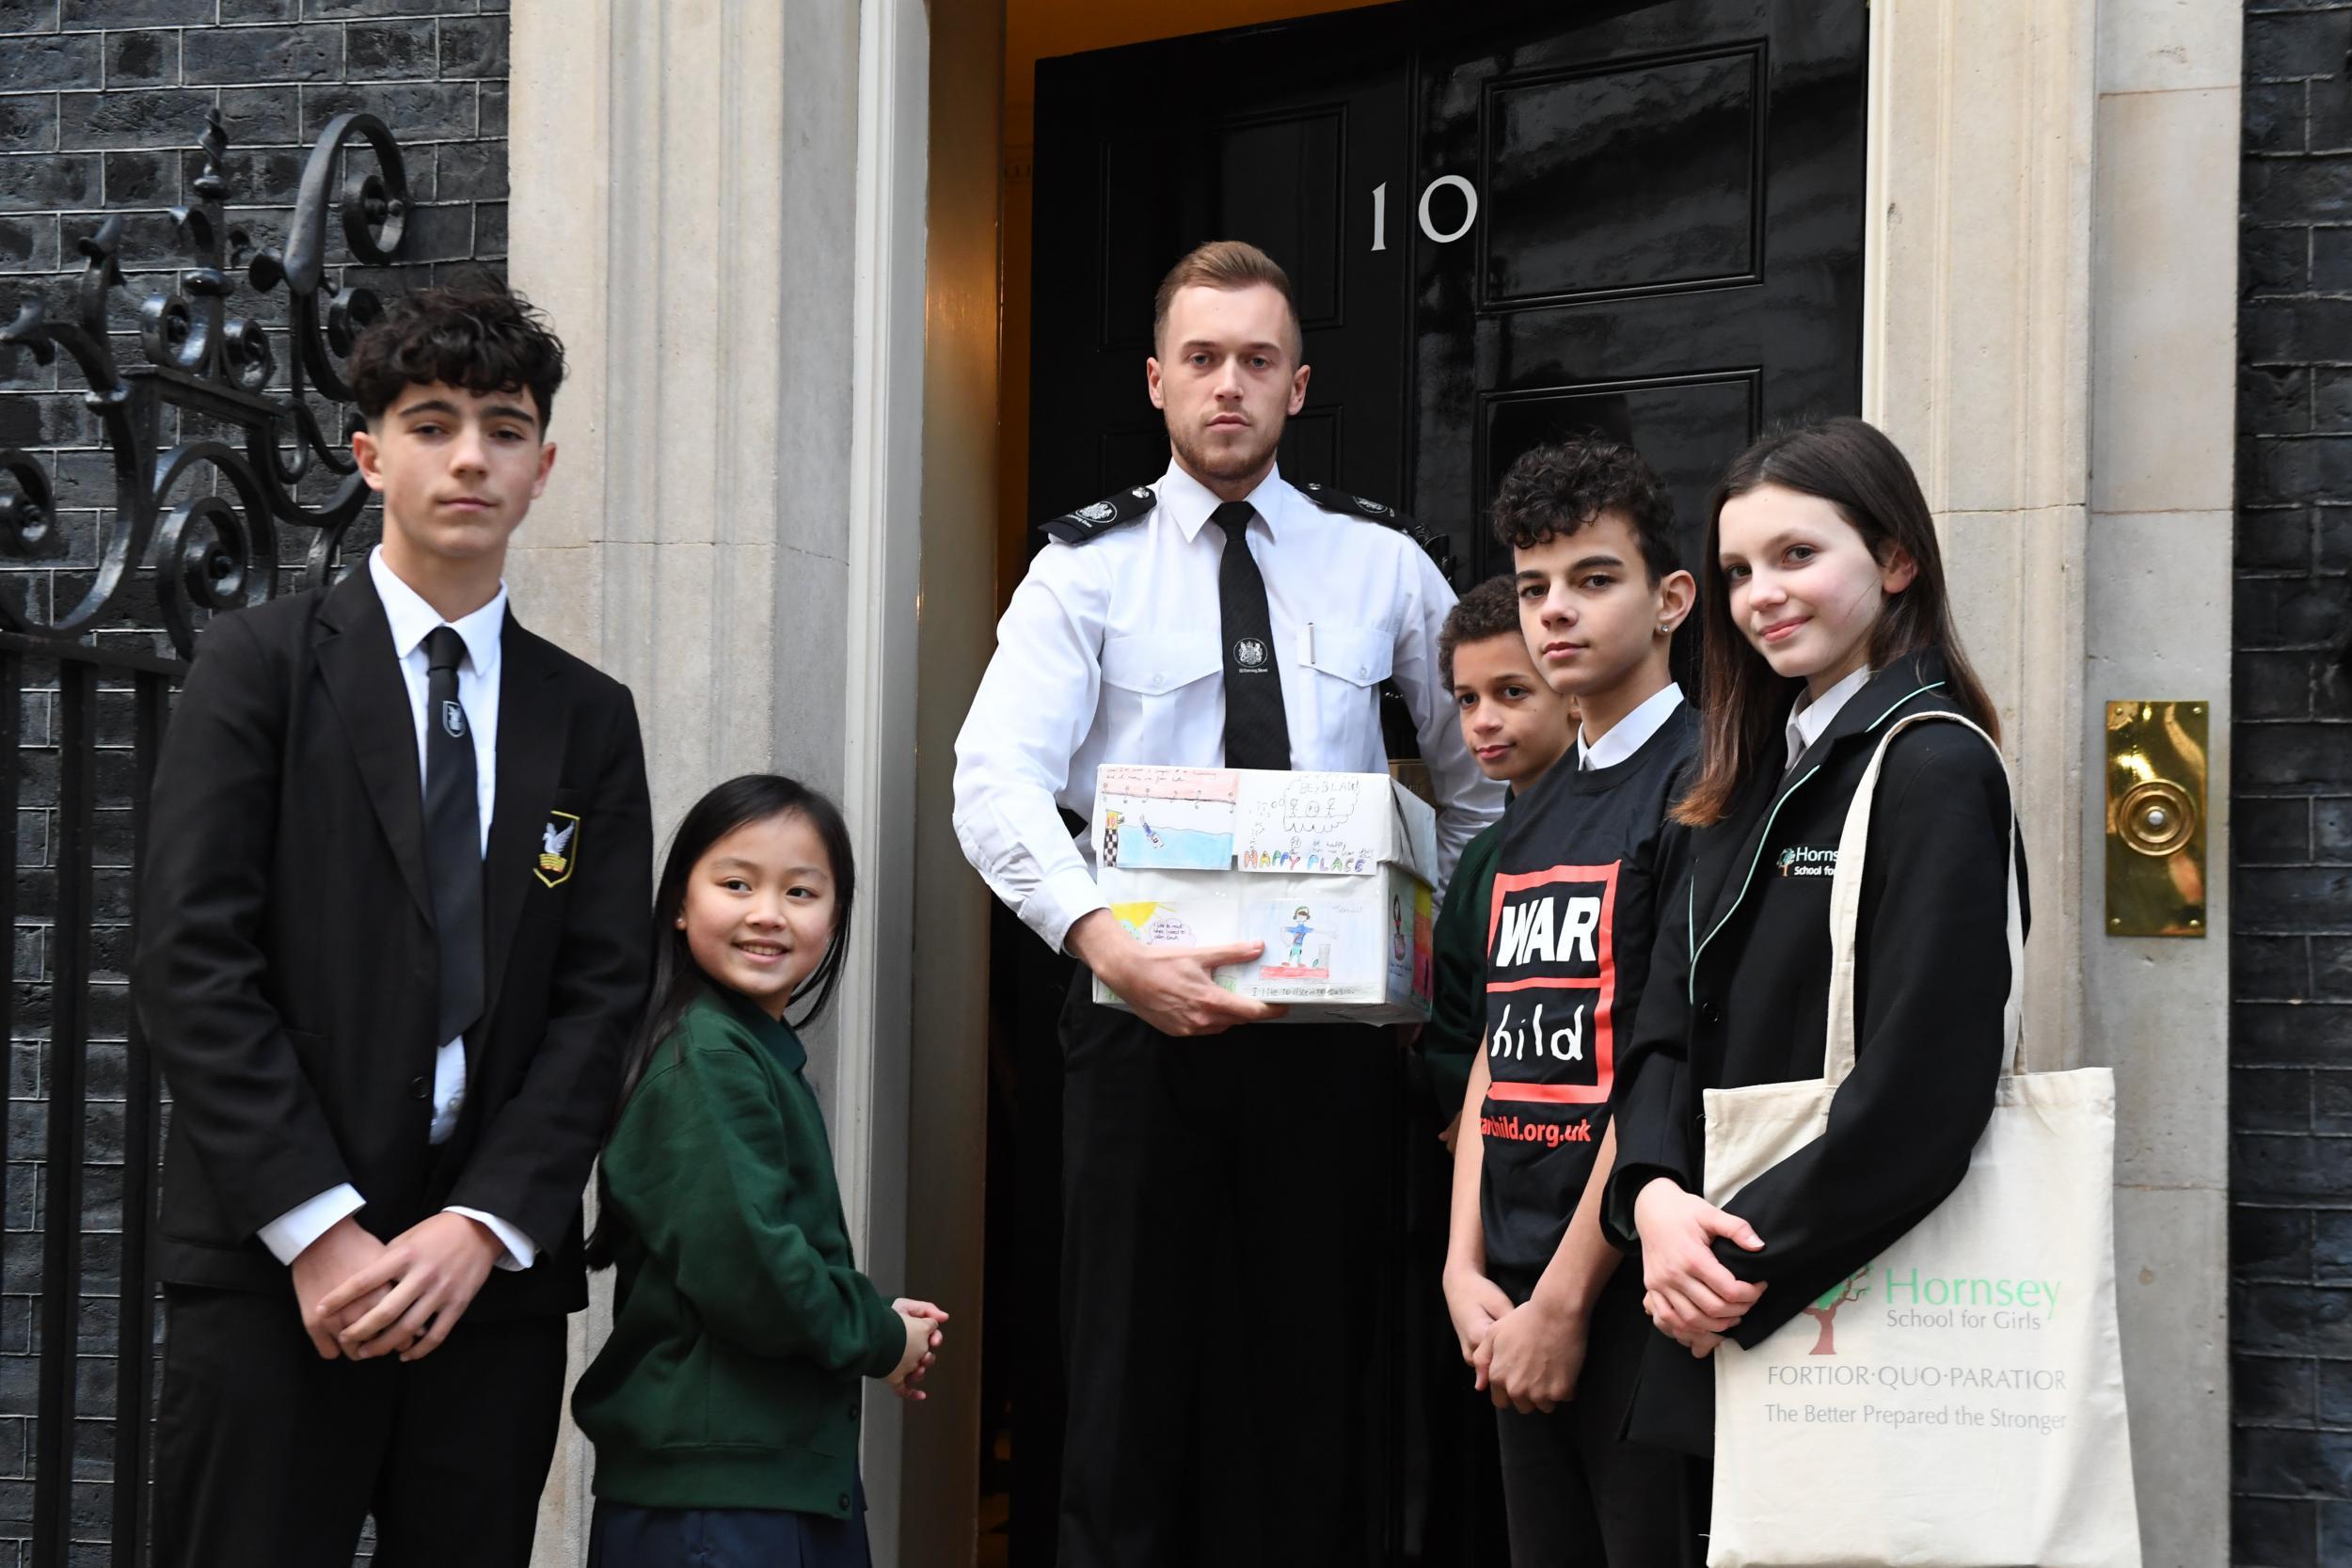 London students hand-deliver campaign letters to Theresa May on Monday